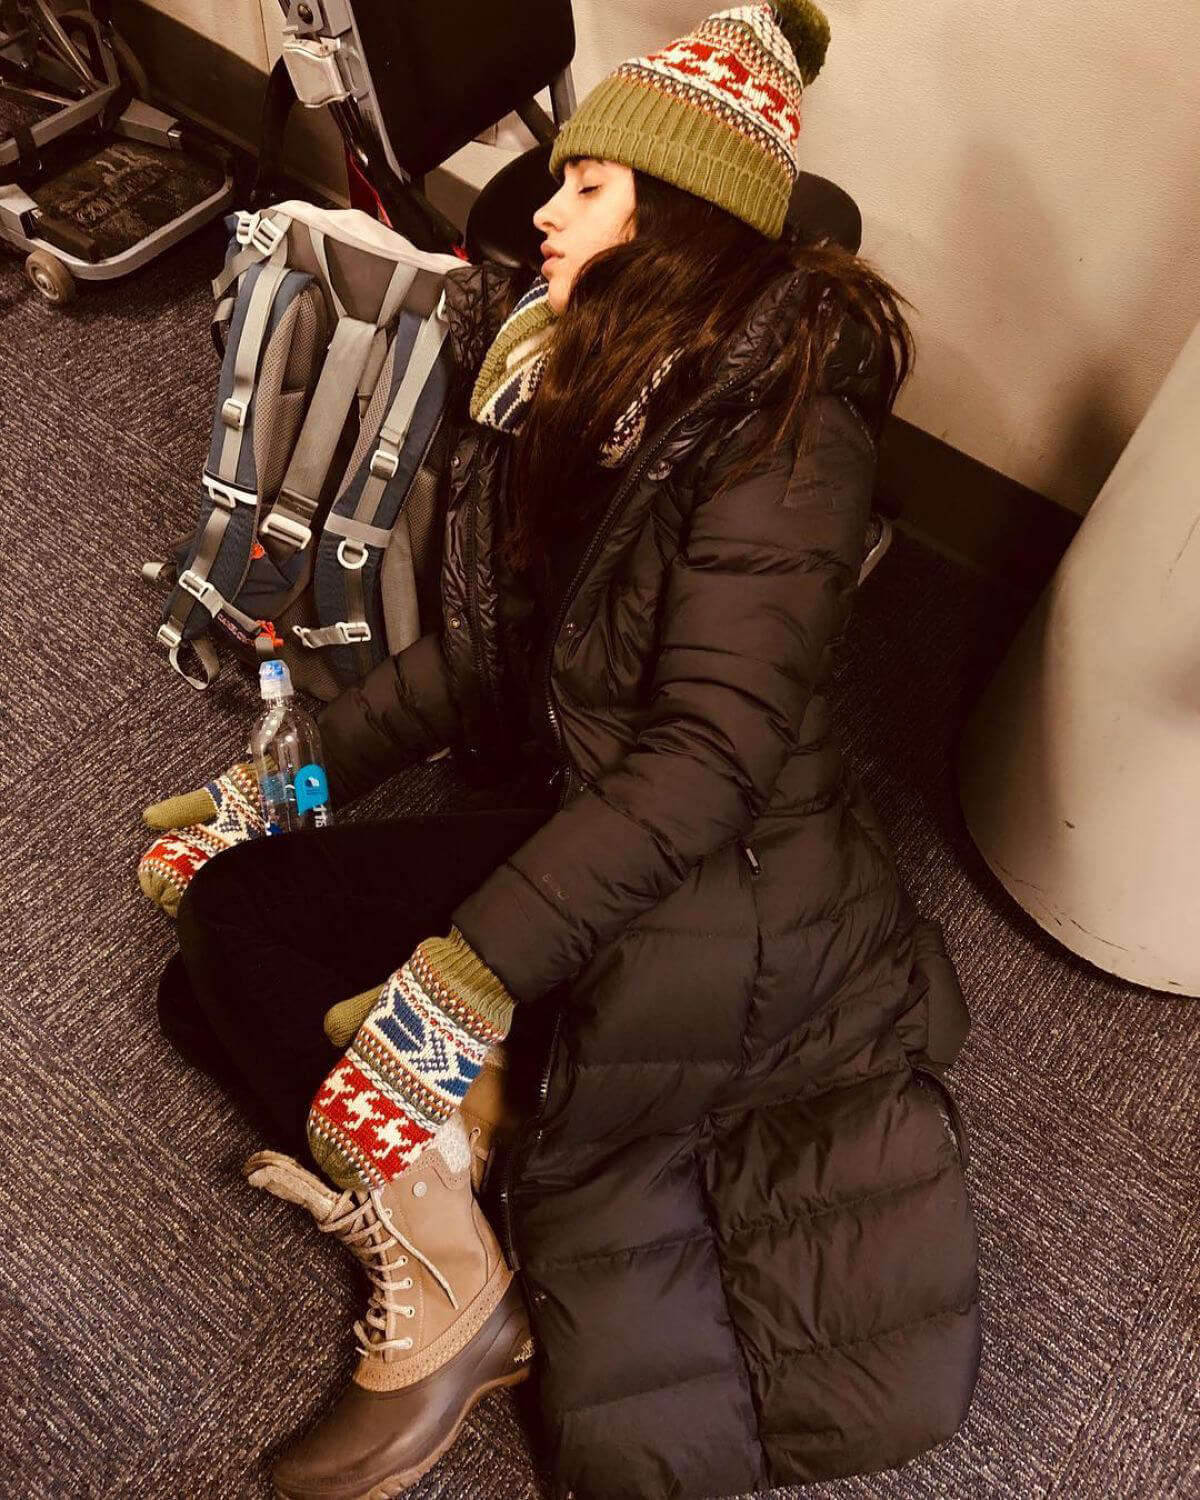 Camila Cabello Sleeping at Airport in Instagram Picture, December 2018